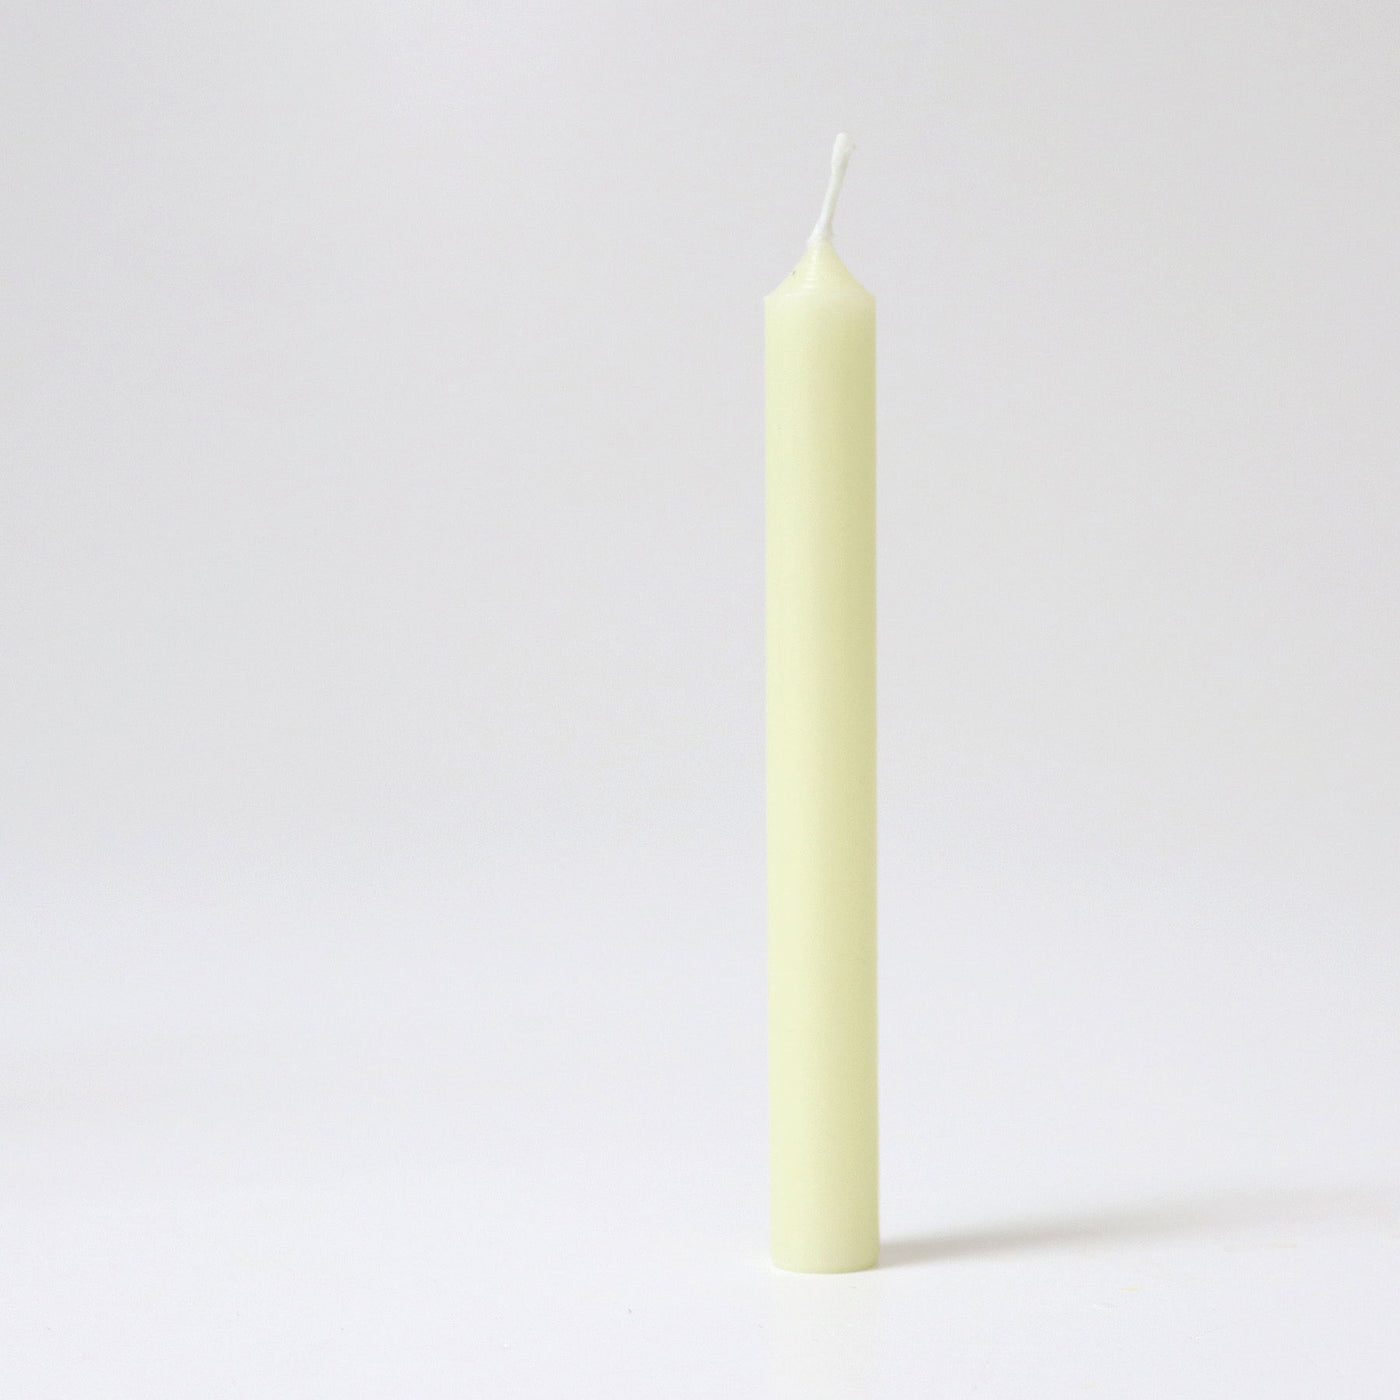 05201 Grimms Beeswax Candles - Creme